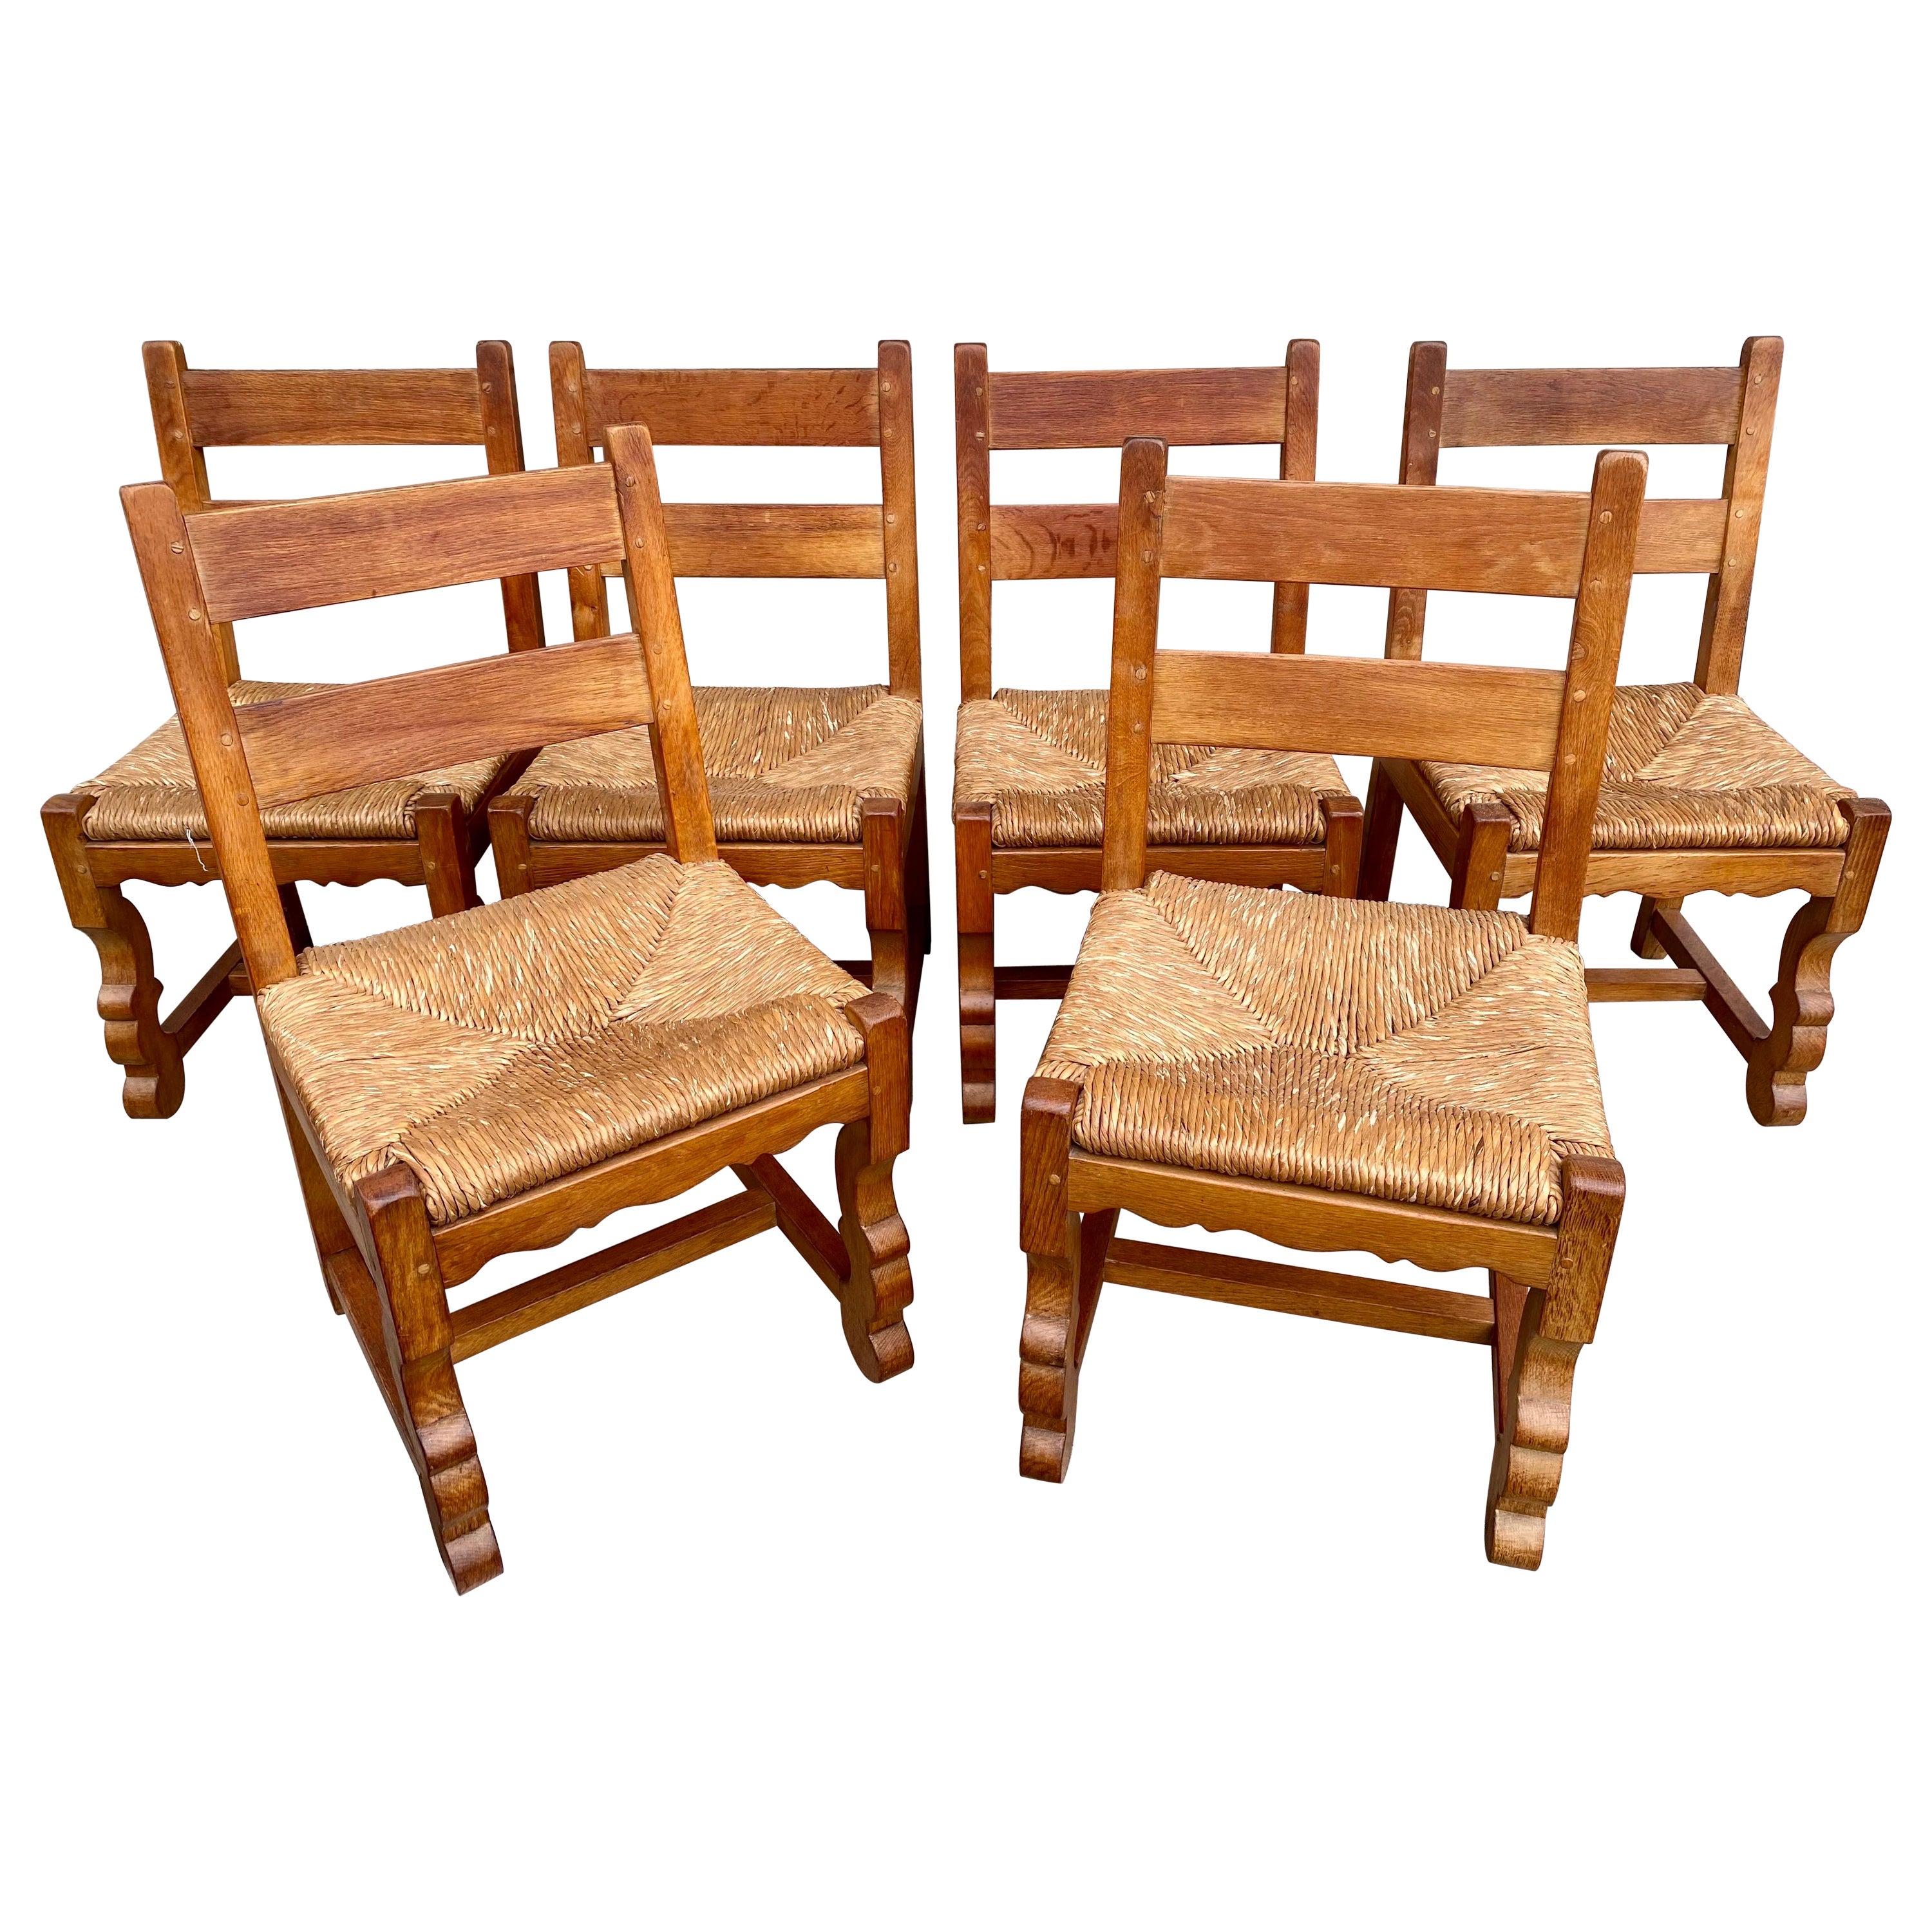 Set of 6 Brutalist Oak and Rush Dining Chairs, Circa 1960s, France